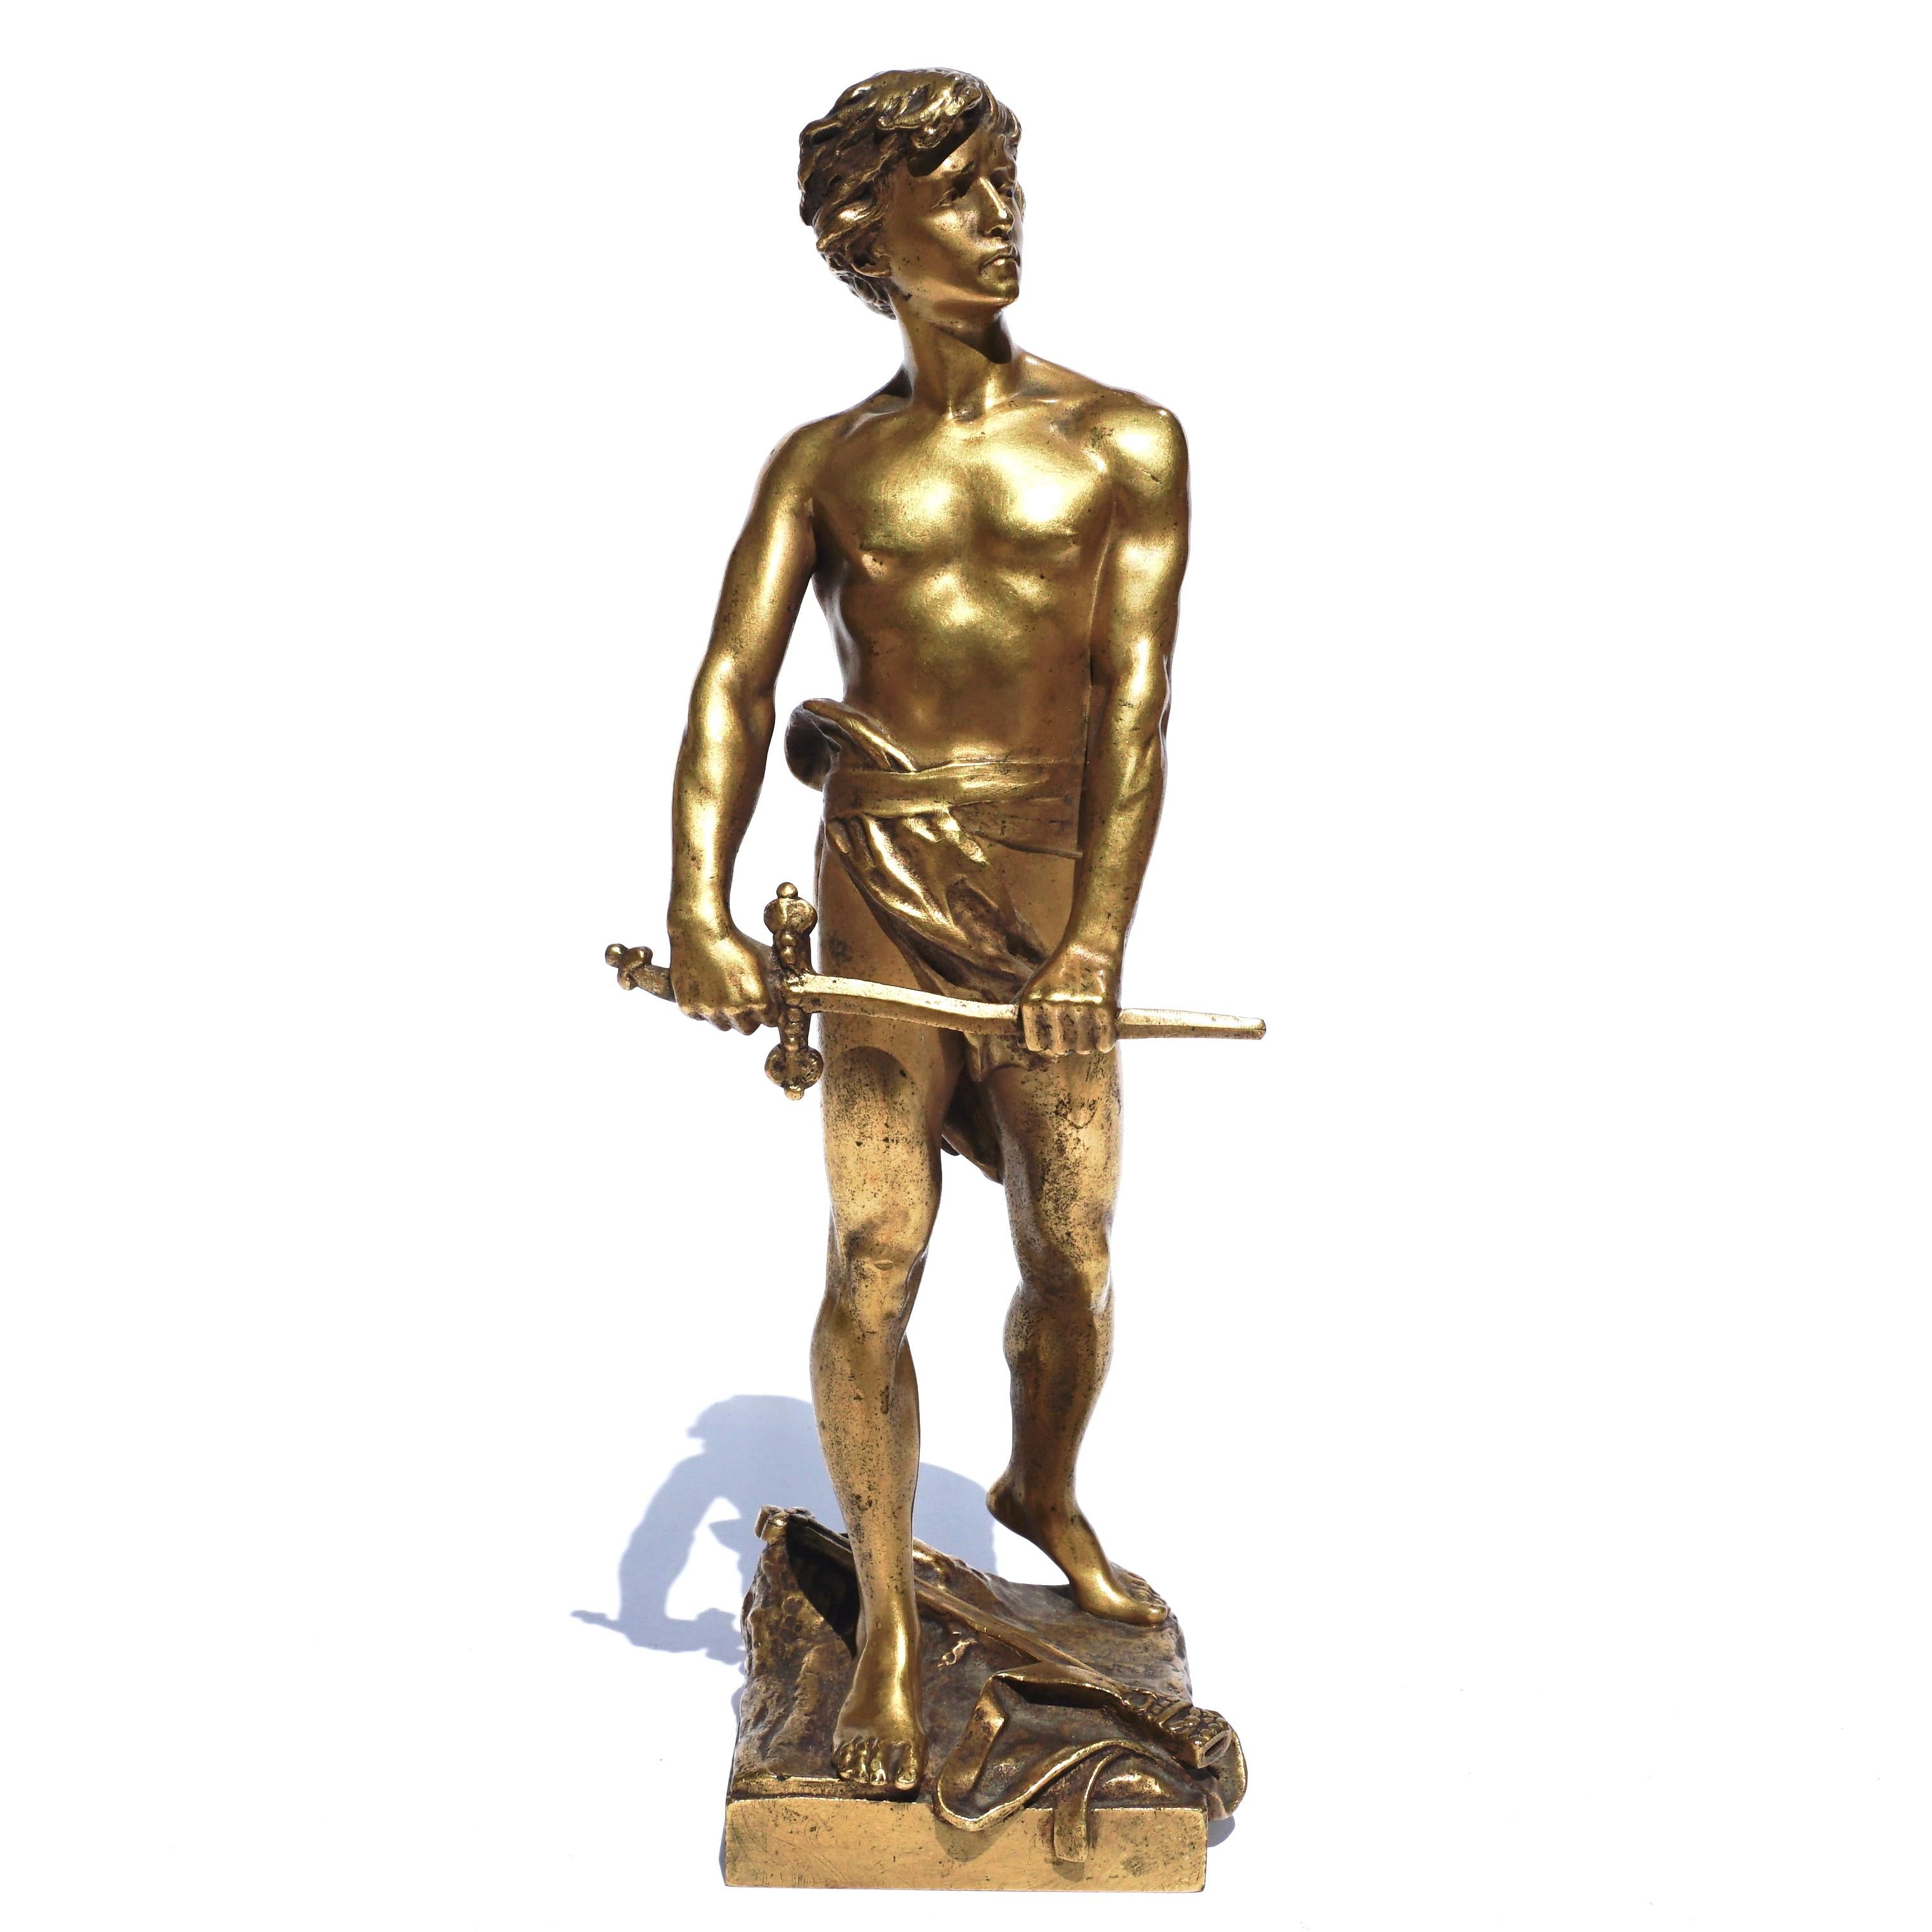 A fine antique bronze by prominent art nouveau era sculptor Francois-Raoul Larche. (French, 1860-1912). The subject is a male at twenty years old holding a sword, and is titled “Vingt Ans”. His expression is determined and his form is fit from